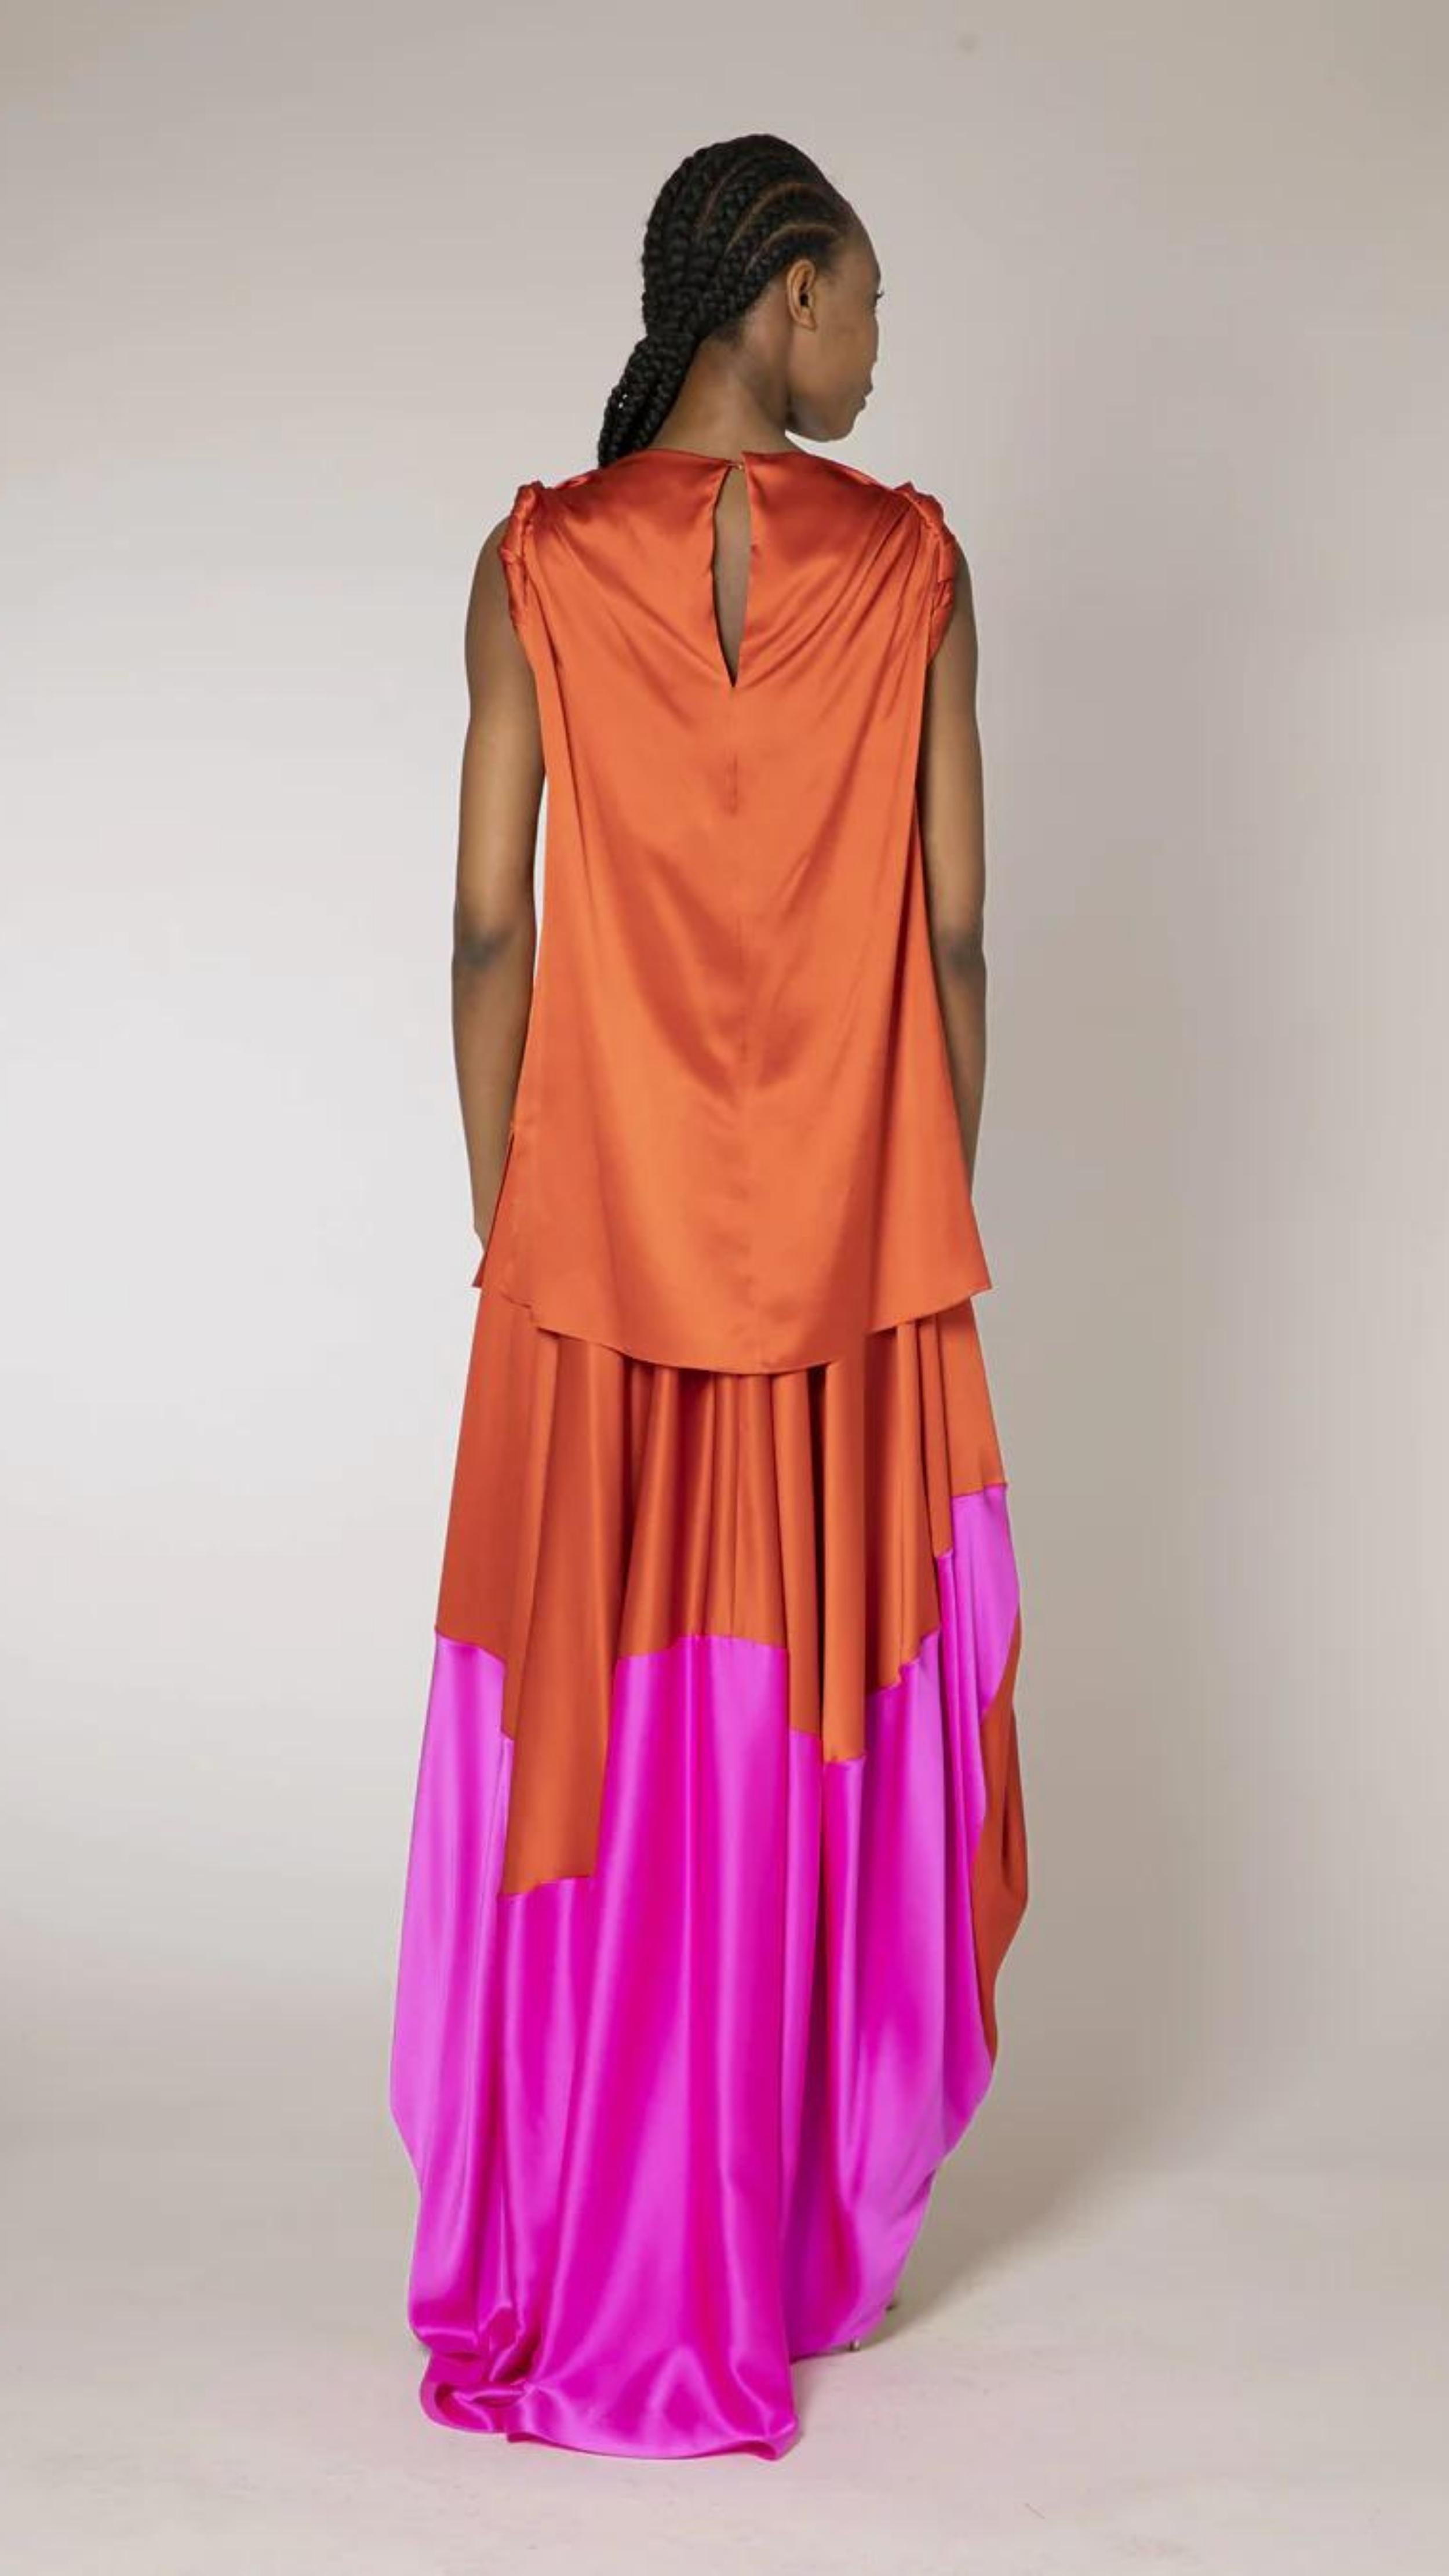 Roksanda Kali Top. Silk sleeveless top in deep rust orange color with braided arms. Long straight style. Shown on model with coordinating Kobi Skirt facing to the back.